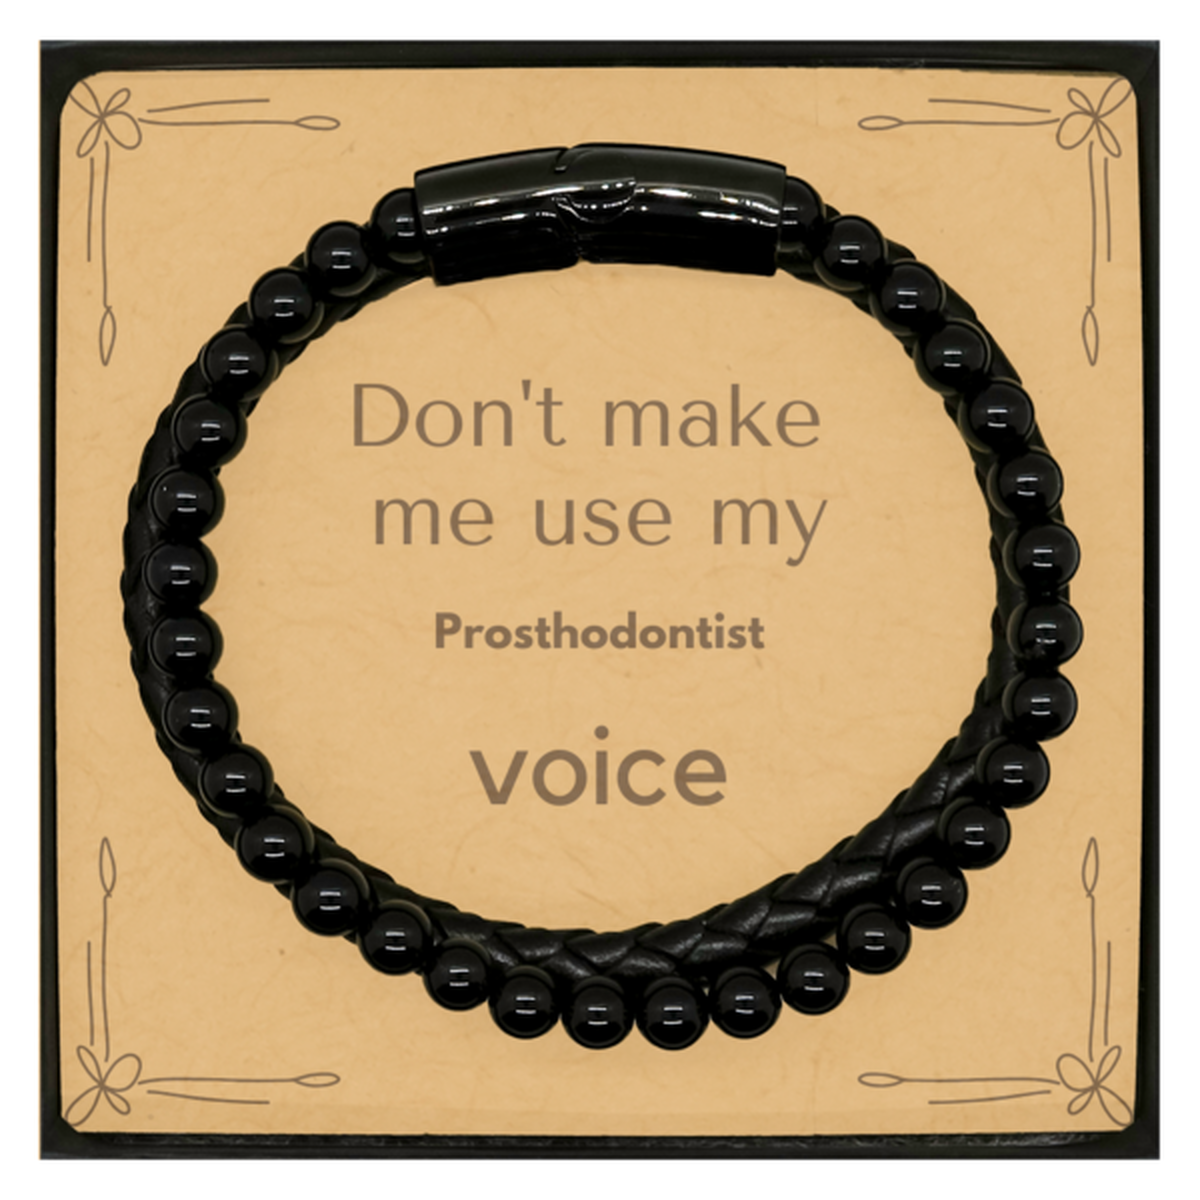 Don't make me use my Prosthodontist voice, Sarcasm Prosthodontist Card Gifts, Christmas Prosthodontist Stone Leather Bracelets Birthday Unique Gifts For Prosthodontist Coworkers, Men, Women, Colleague, Friends